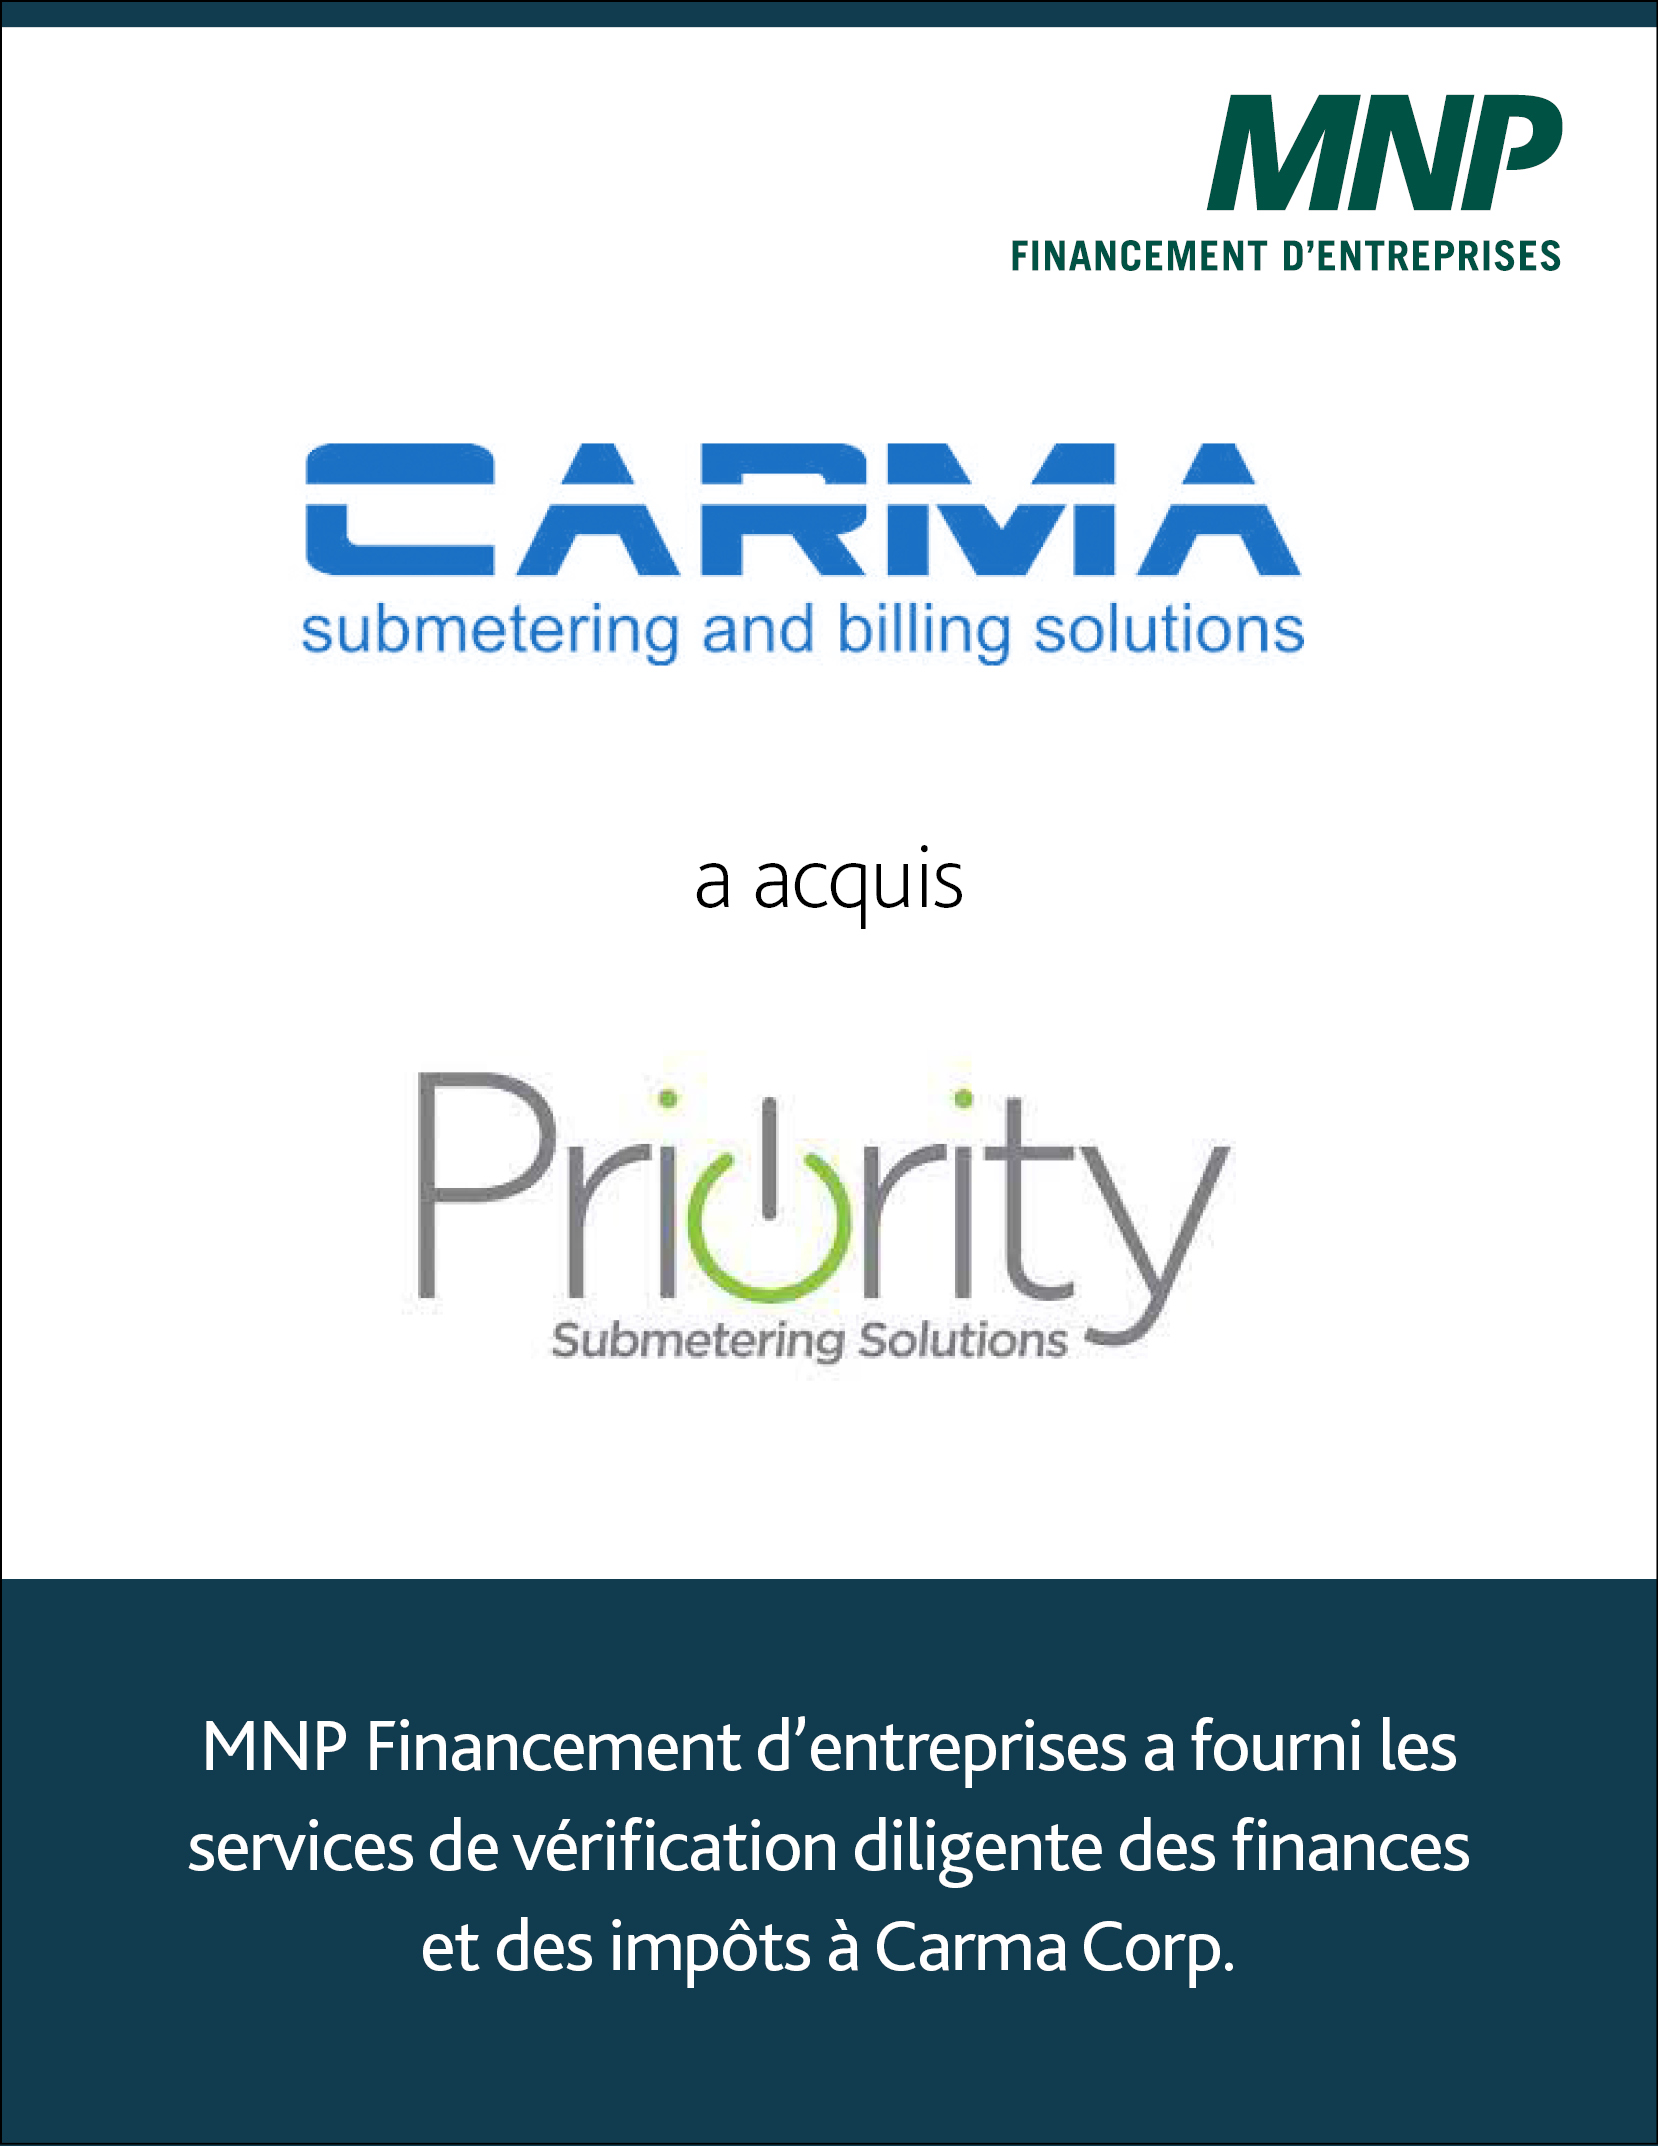 Carma Corp. a acquis Priority Submetering Solutions Inc. et Priority Submetering Solutions, SARL